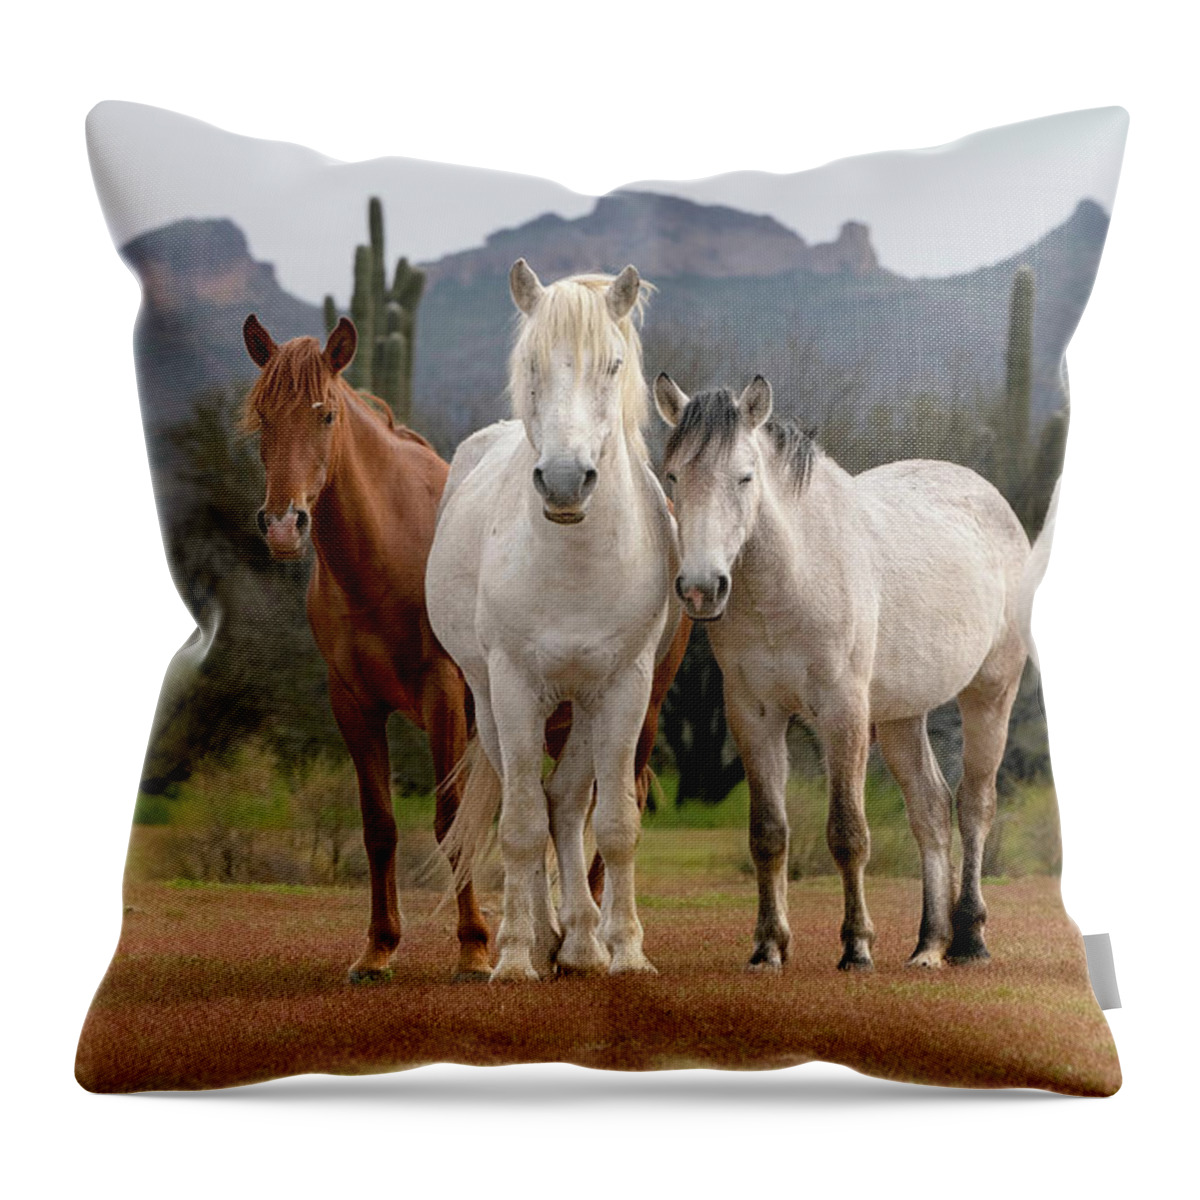 Stallion Throw Pillow featuring the photograph Desert Pose. by Paul Martin